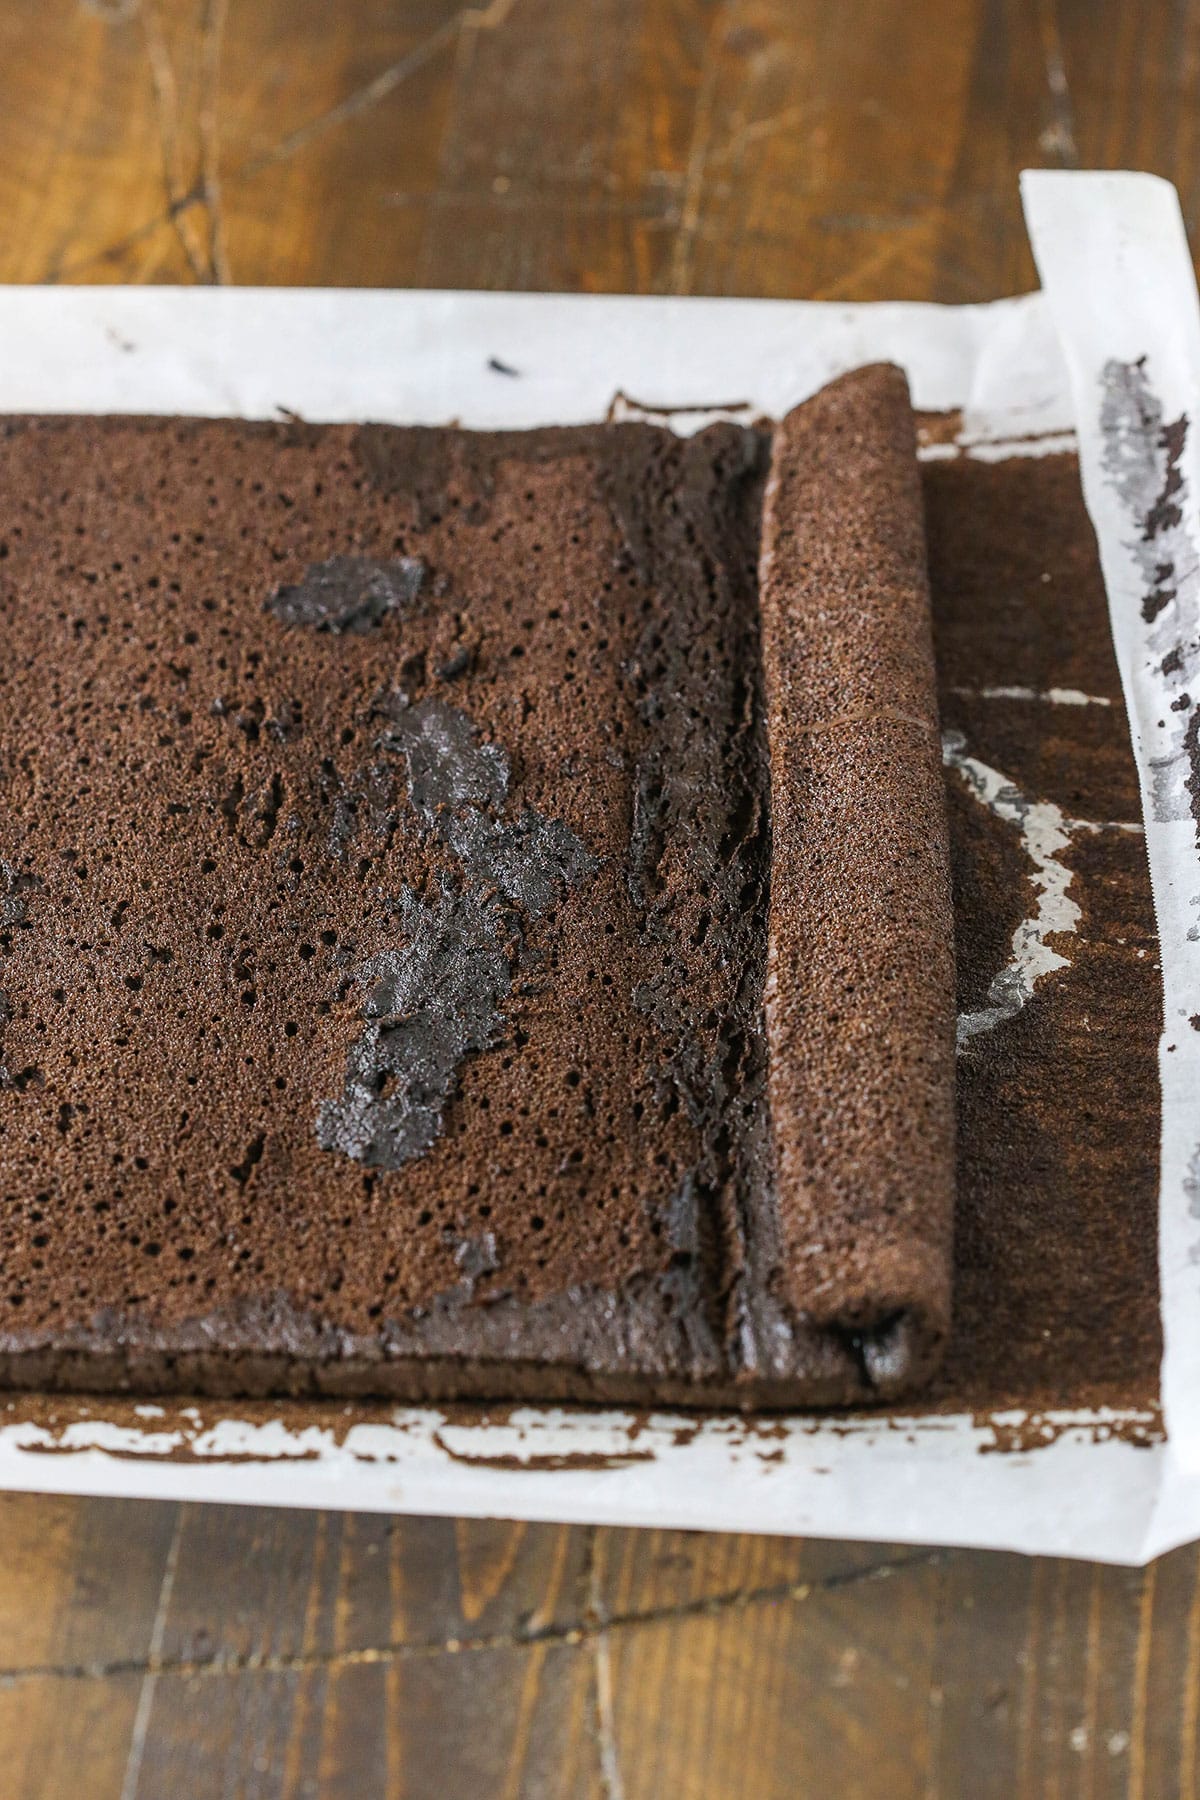 A step in making a Yule Log Cake showing the cool baked chocolate cake unrolled in preparation for adding the filling